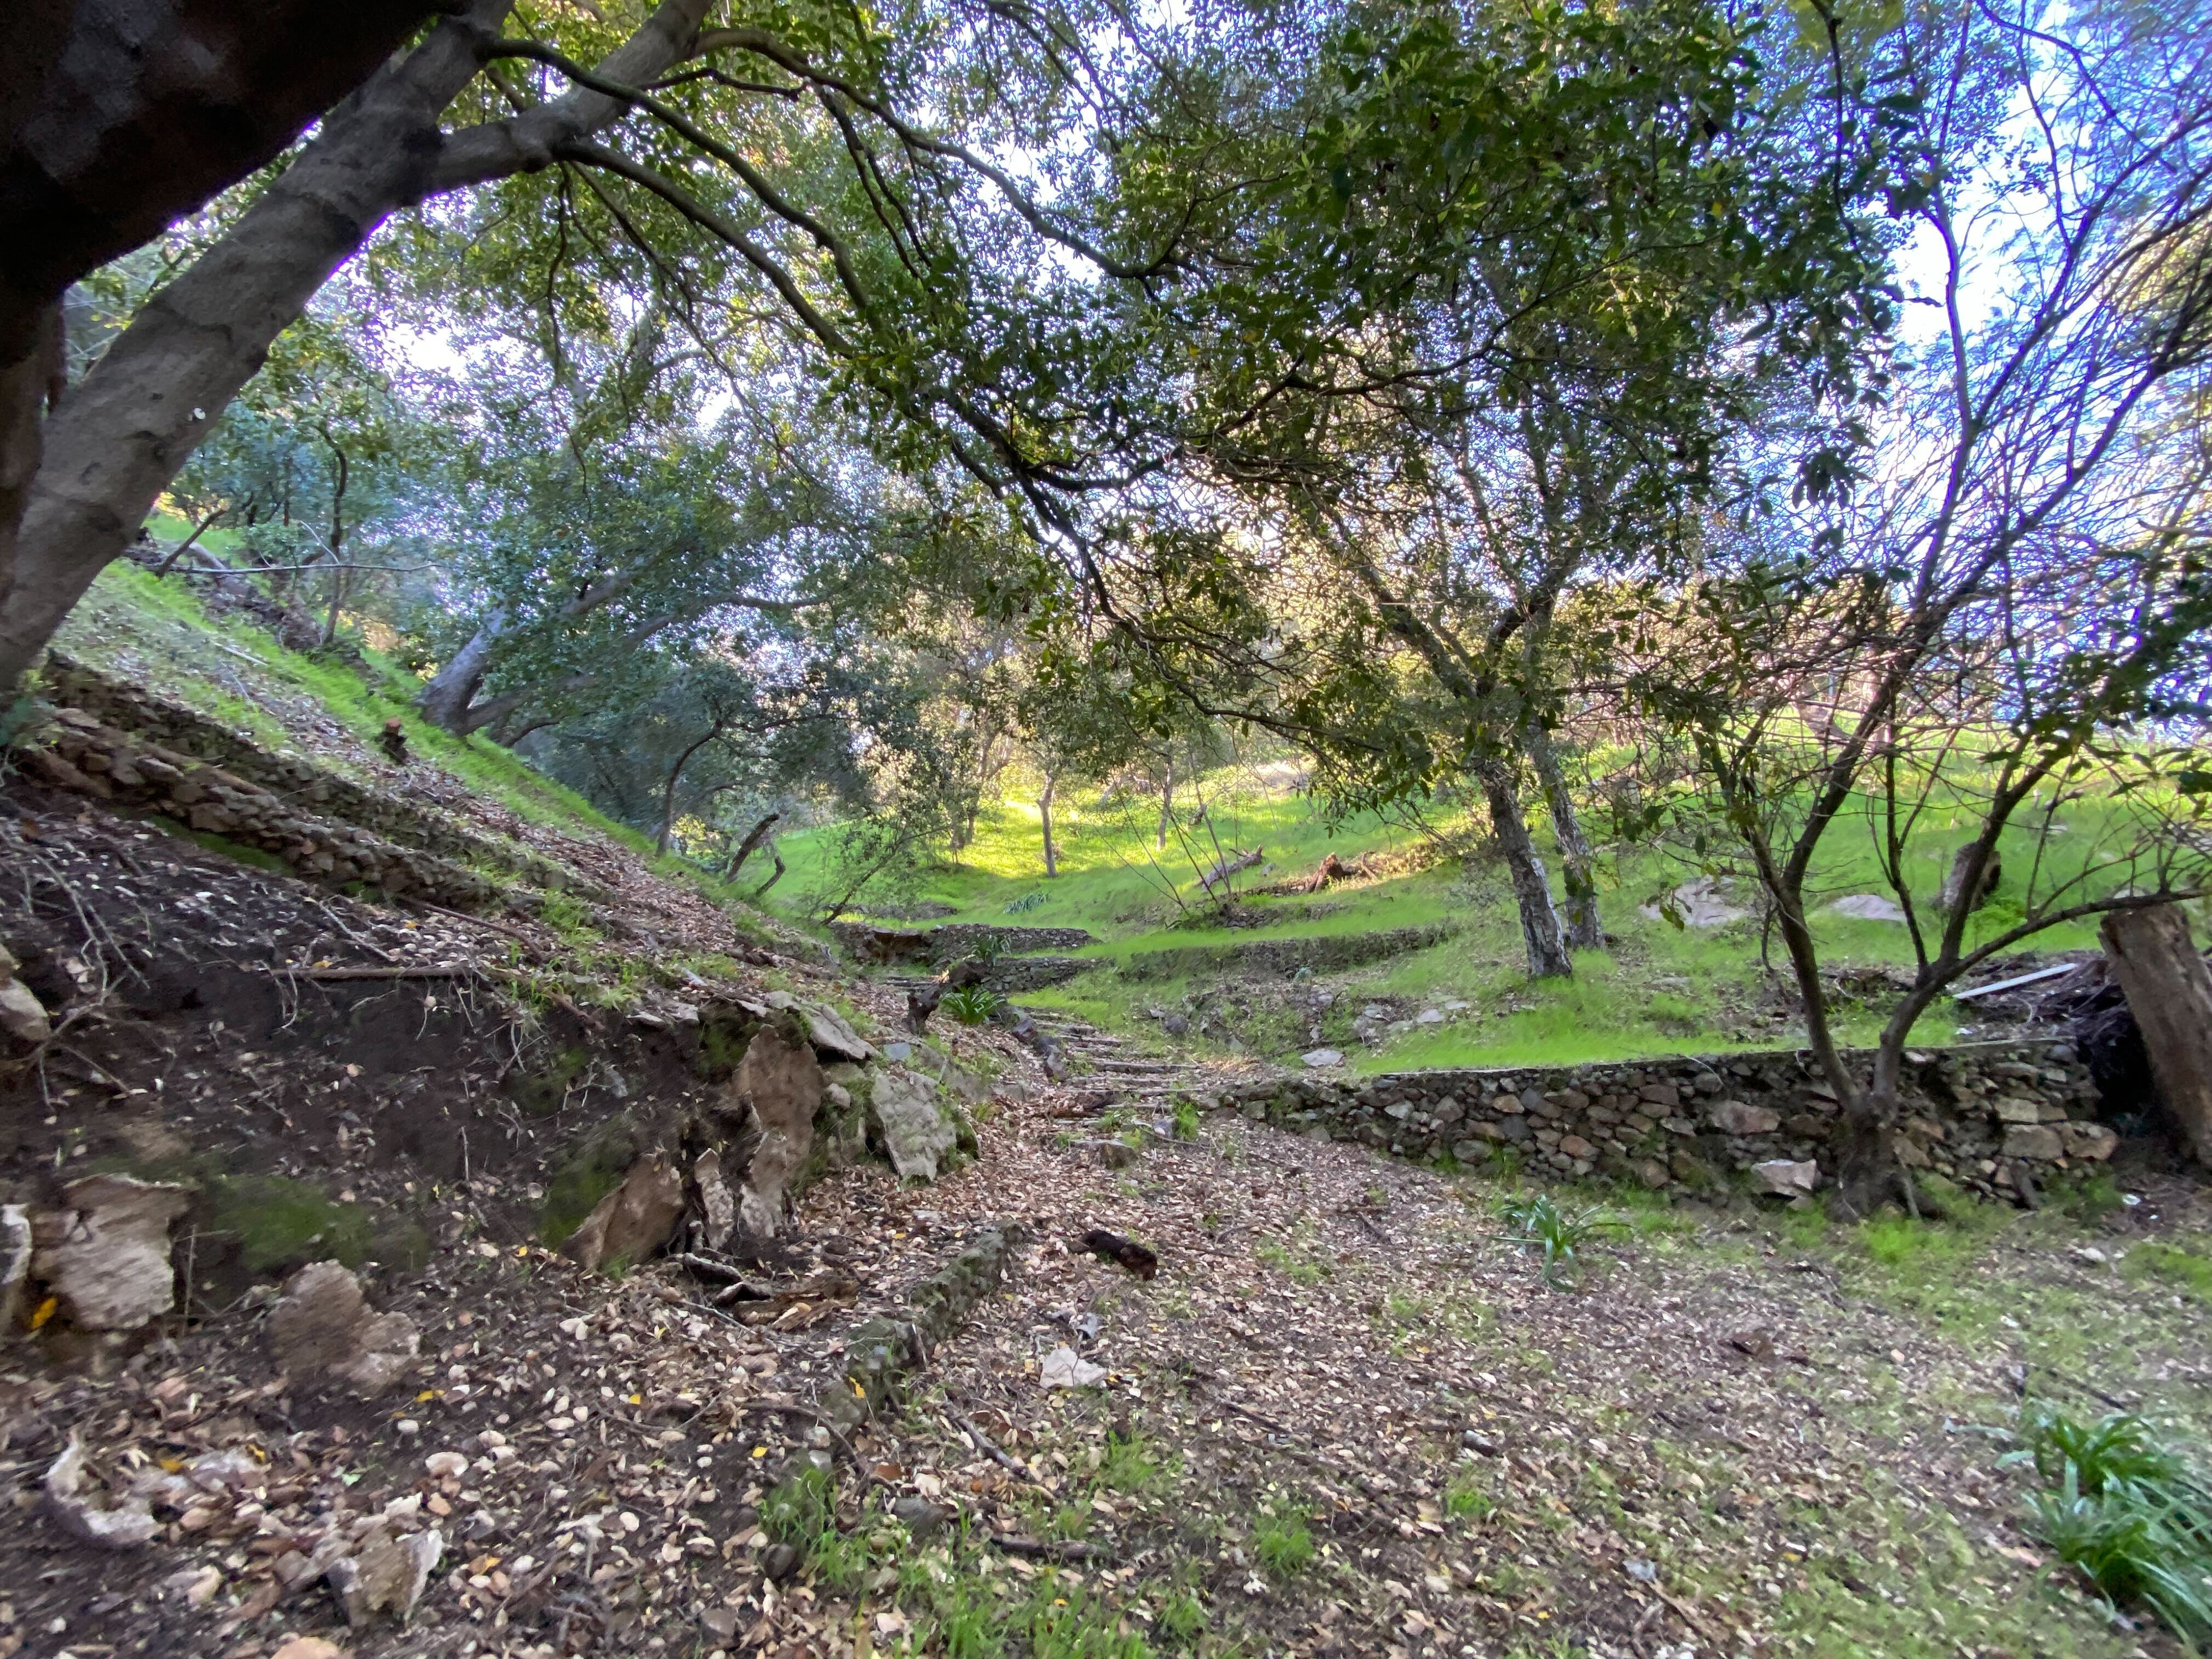 Non-profit raising $1 million to buy and preserve land in Laurel Canyon